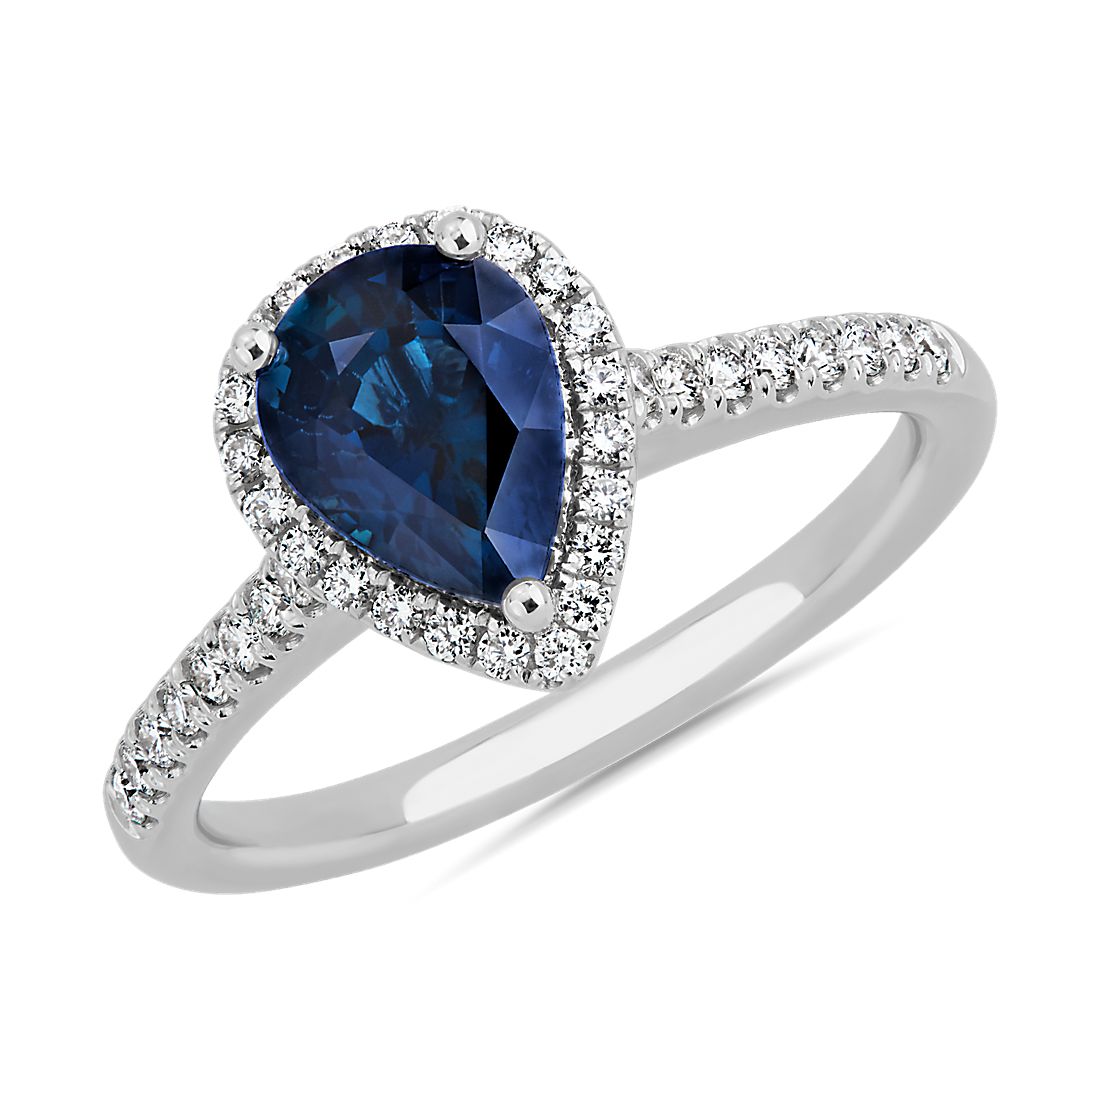 Sapphire Pear Shape Halo Ring in 14k White Gold (8x6mm)